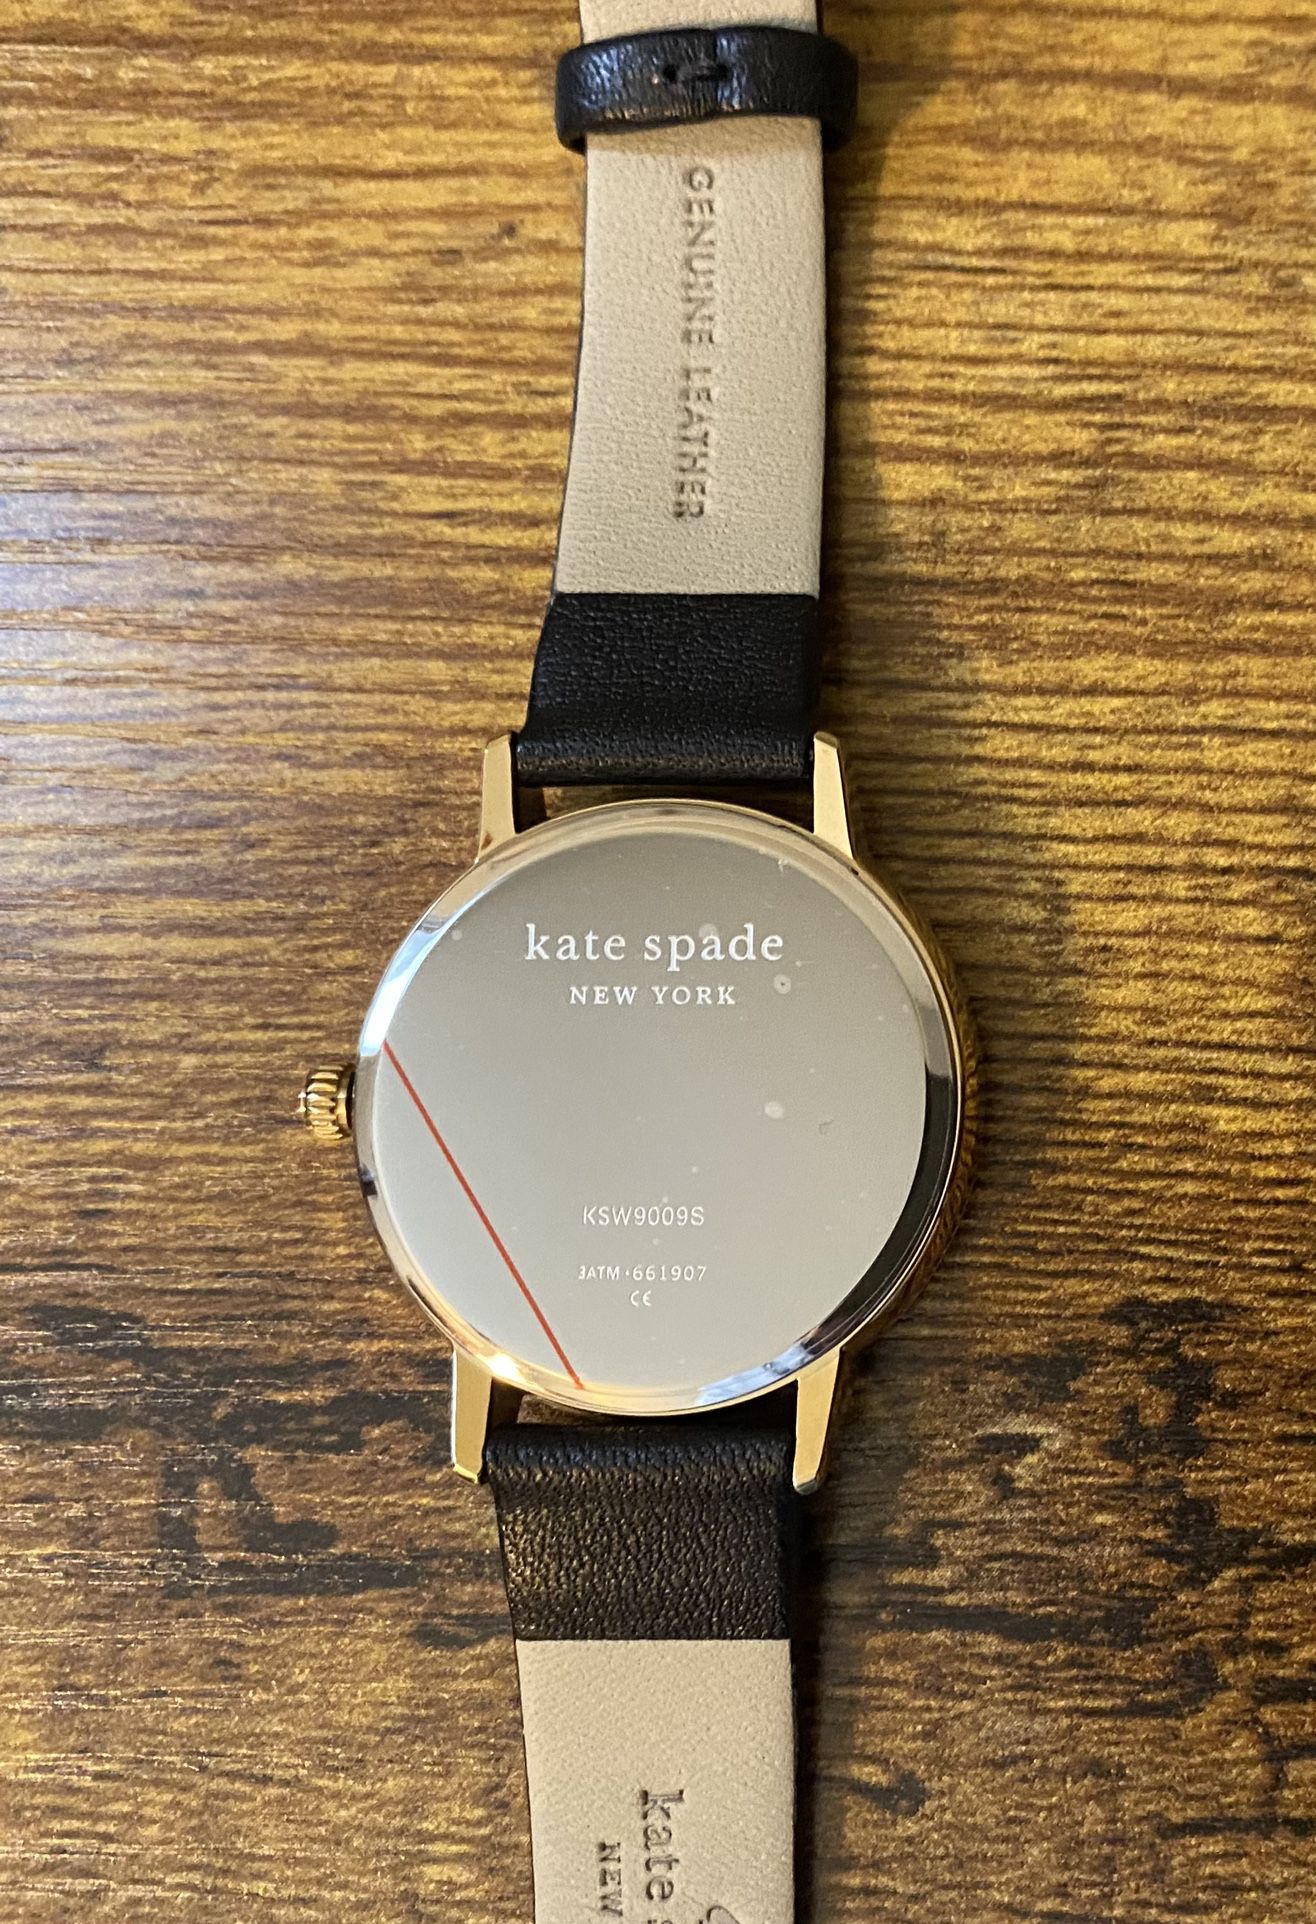 Kate Spade Monogram Steel 34mm Watch Leather Strap KSW9009S ~ Needs New Battery